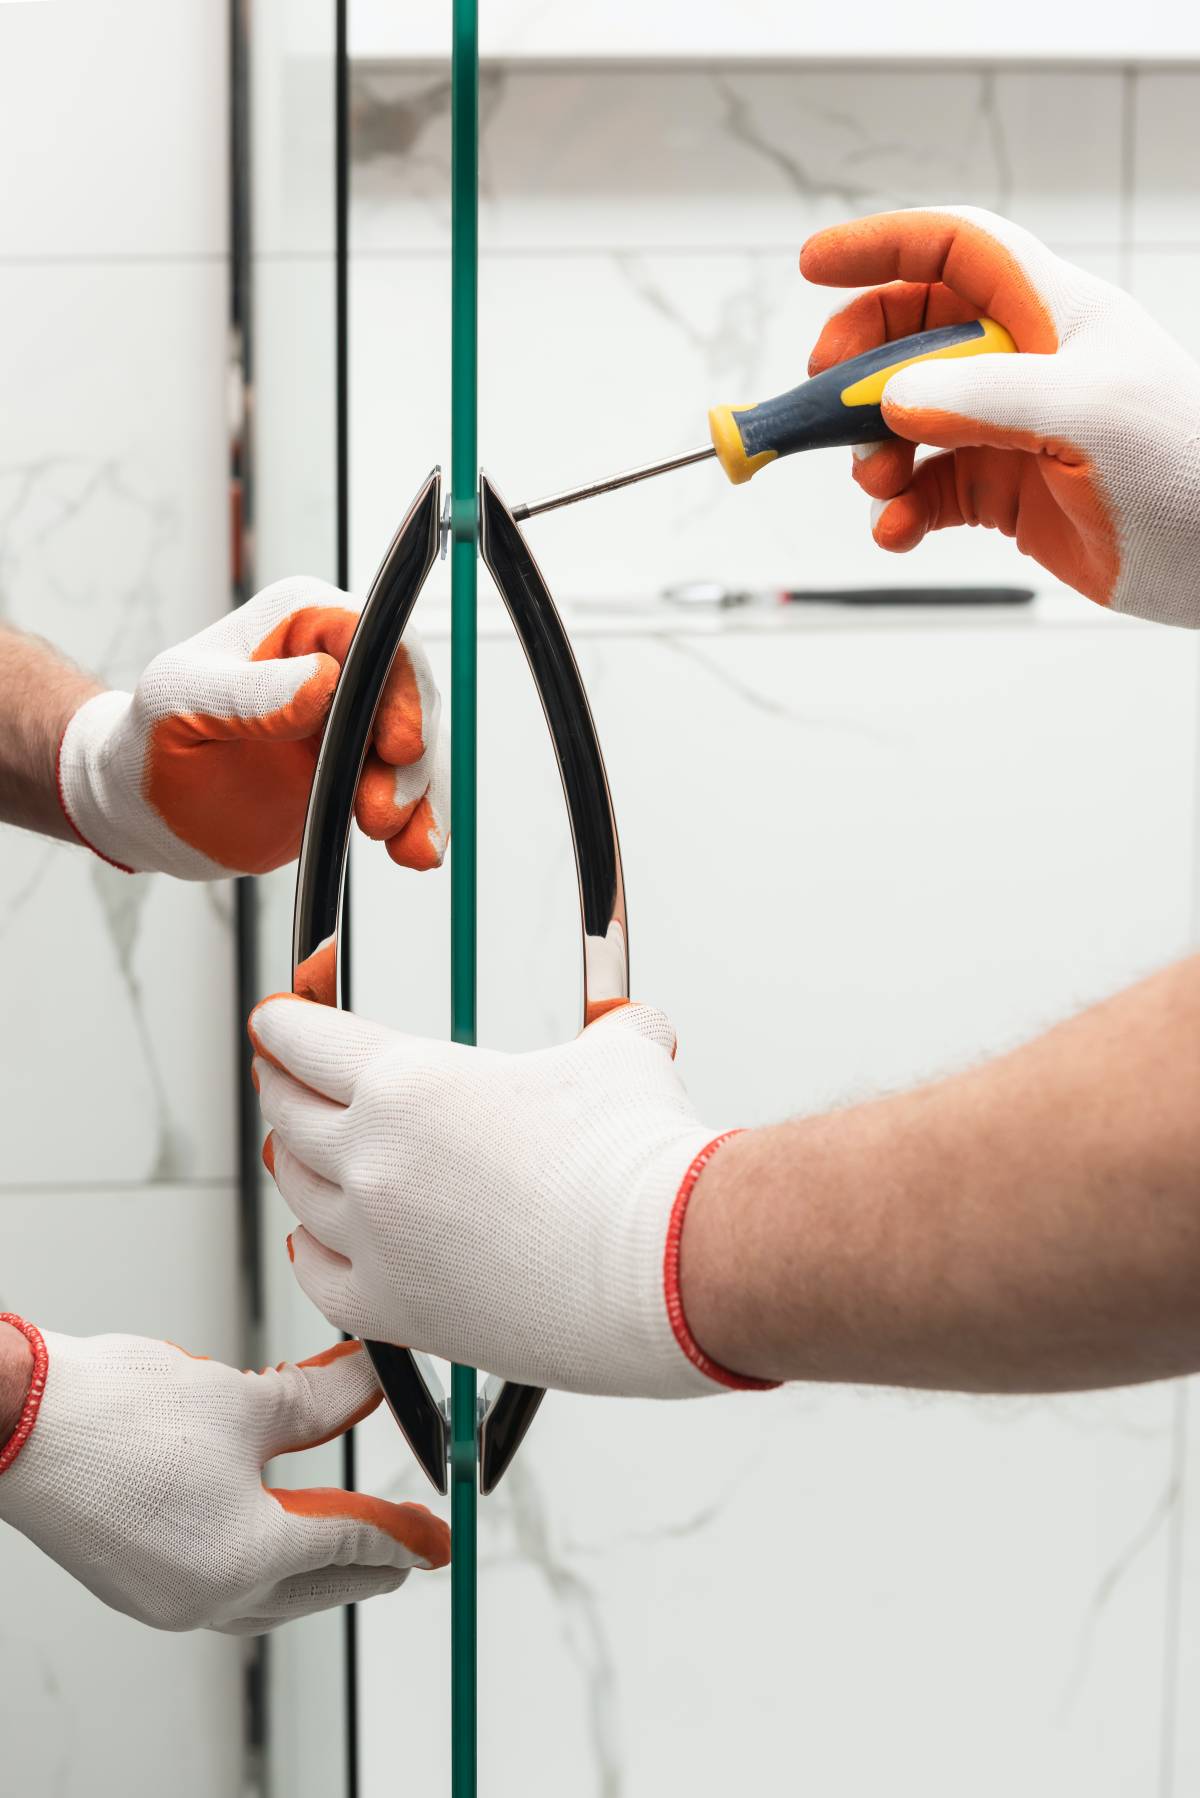 Two pairs of hands wearing orange gloves installing a glass shower screen